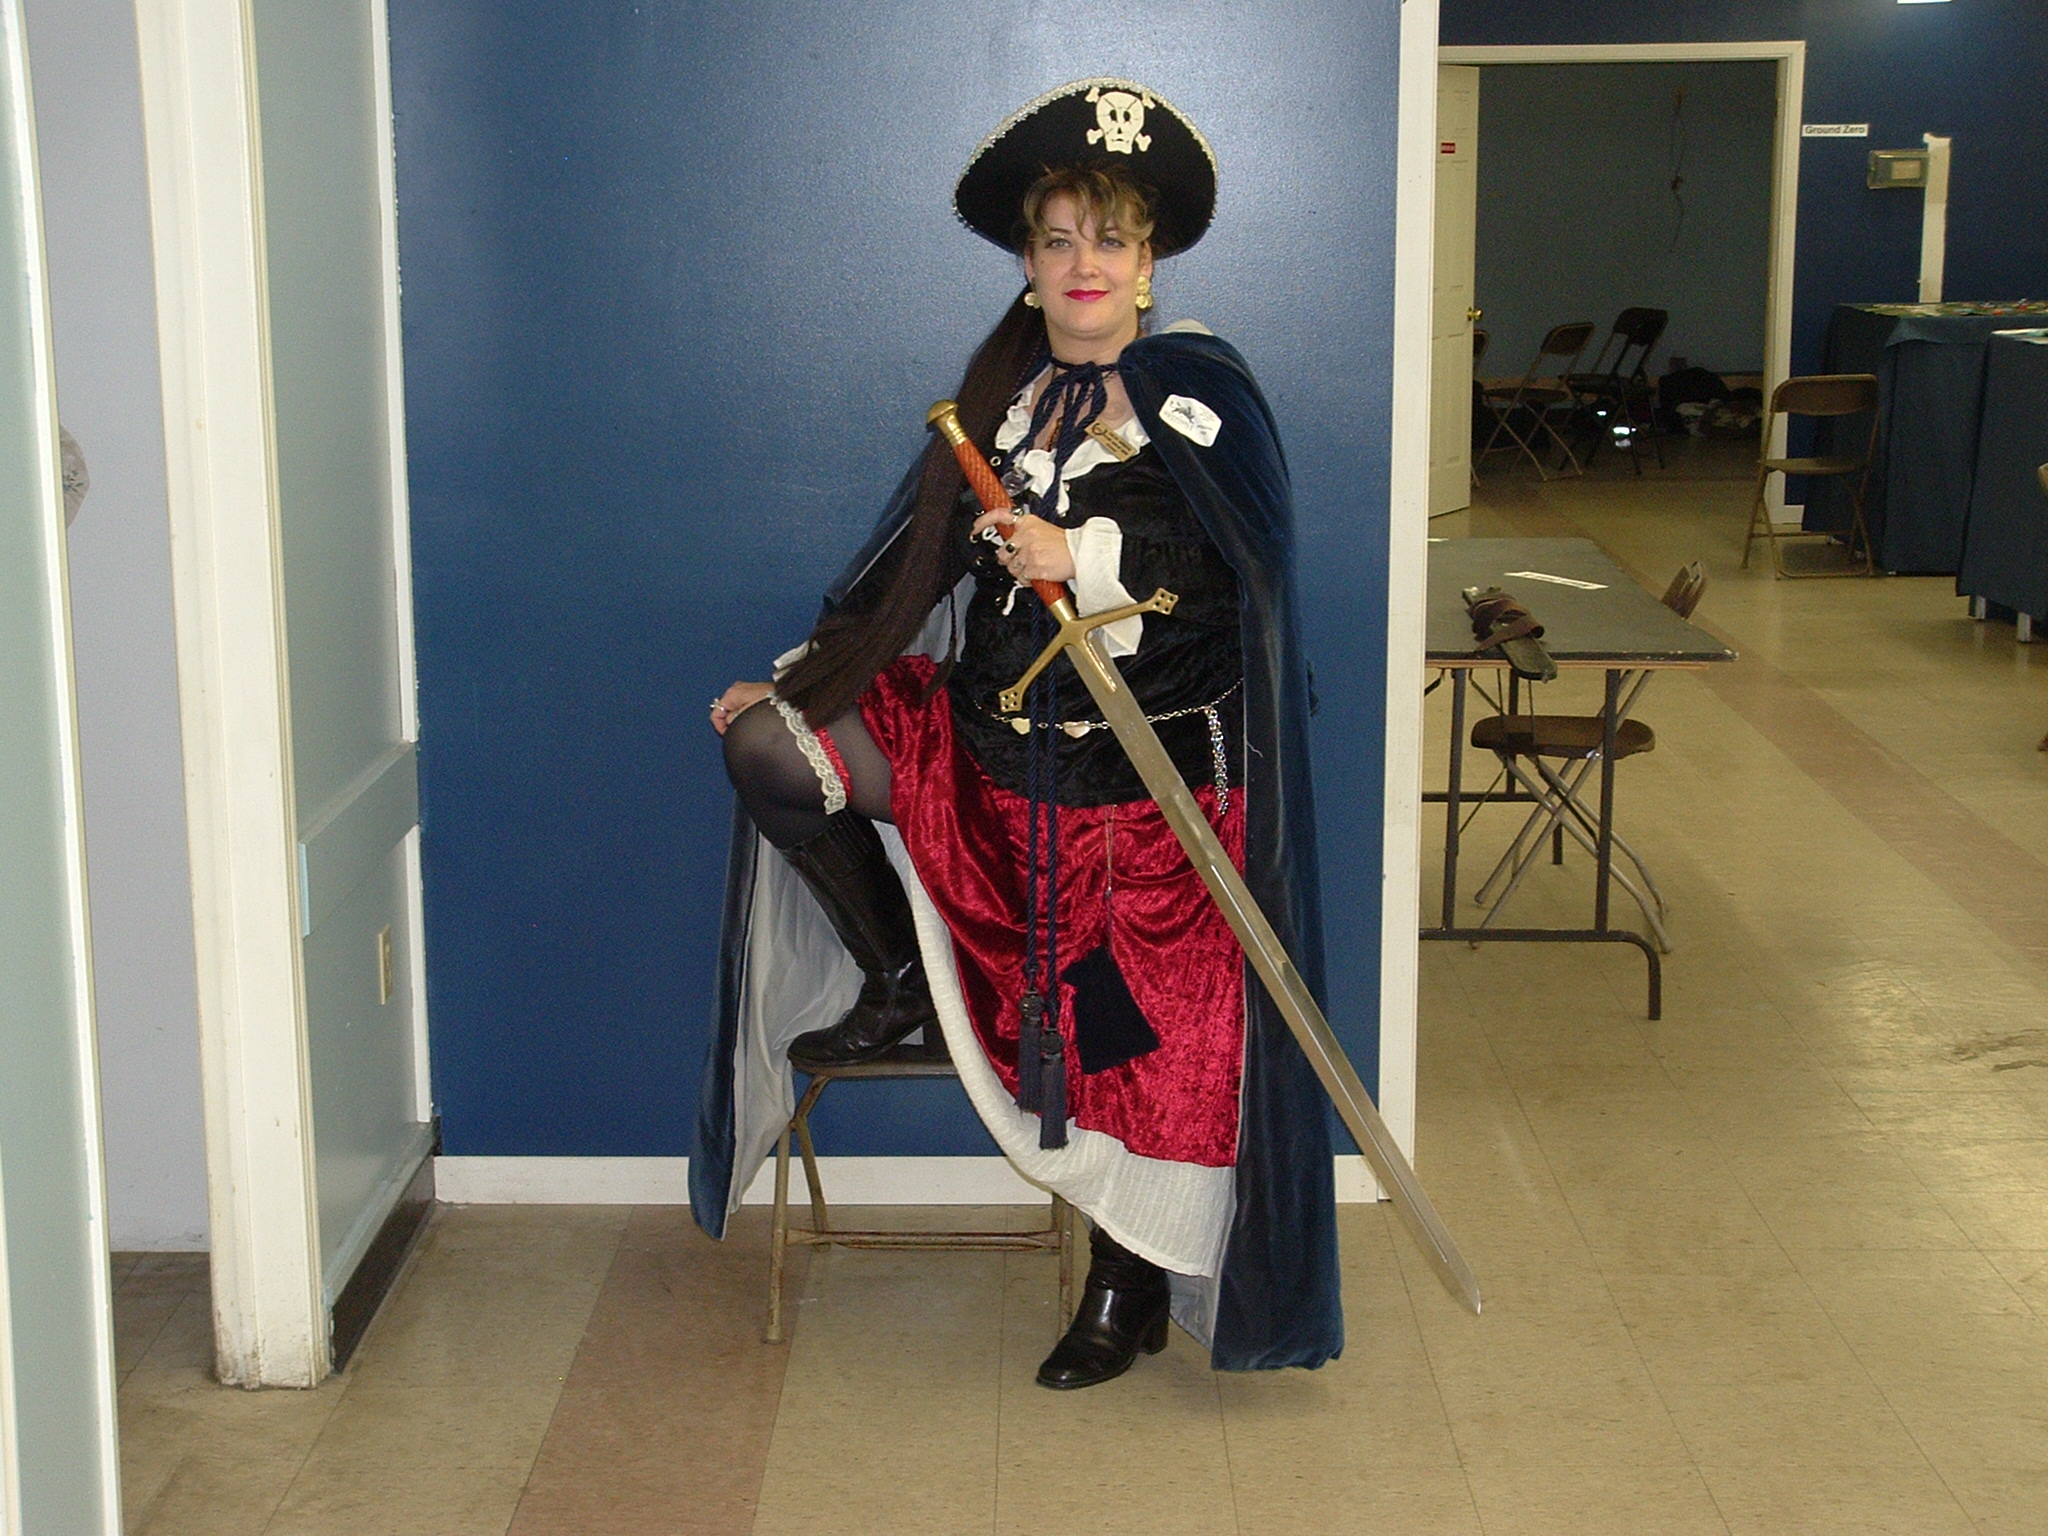 0609-CosPlay-Pirate-03